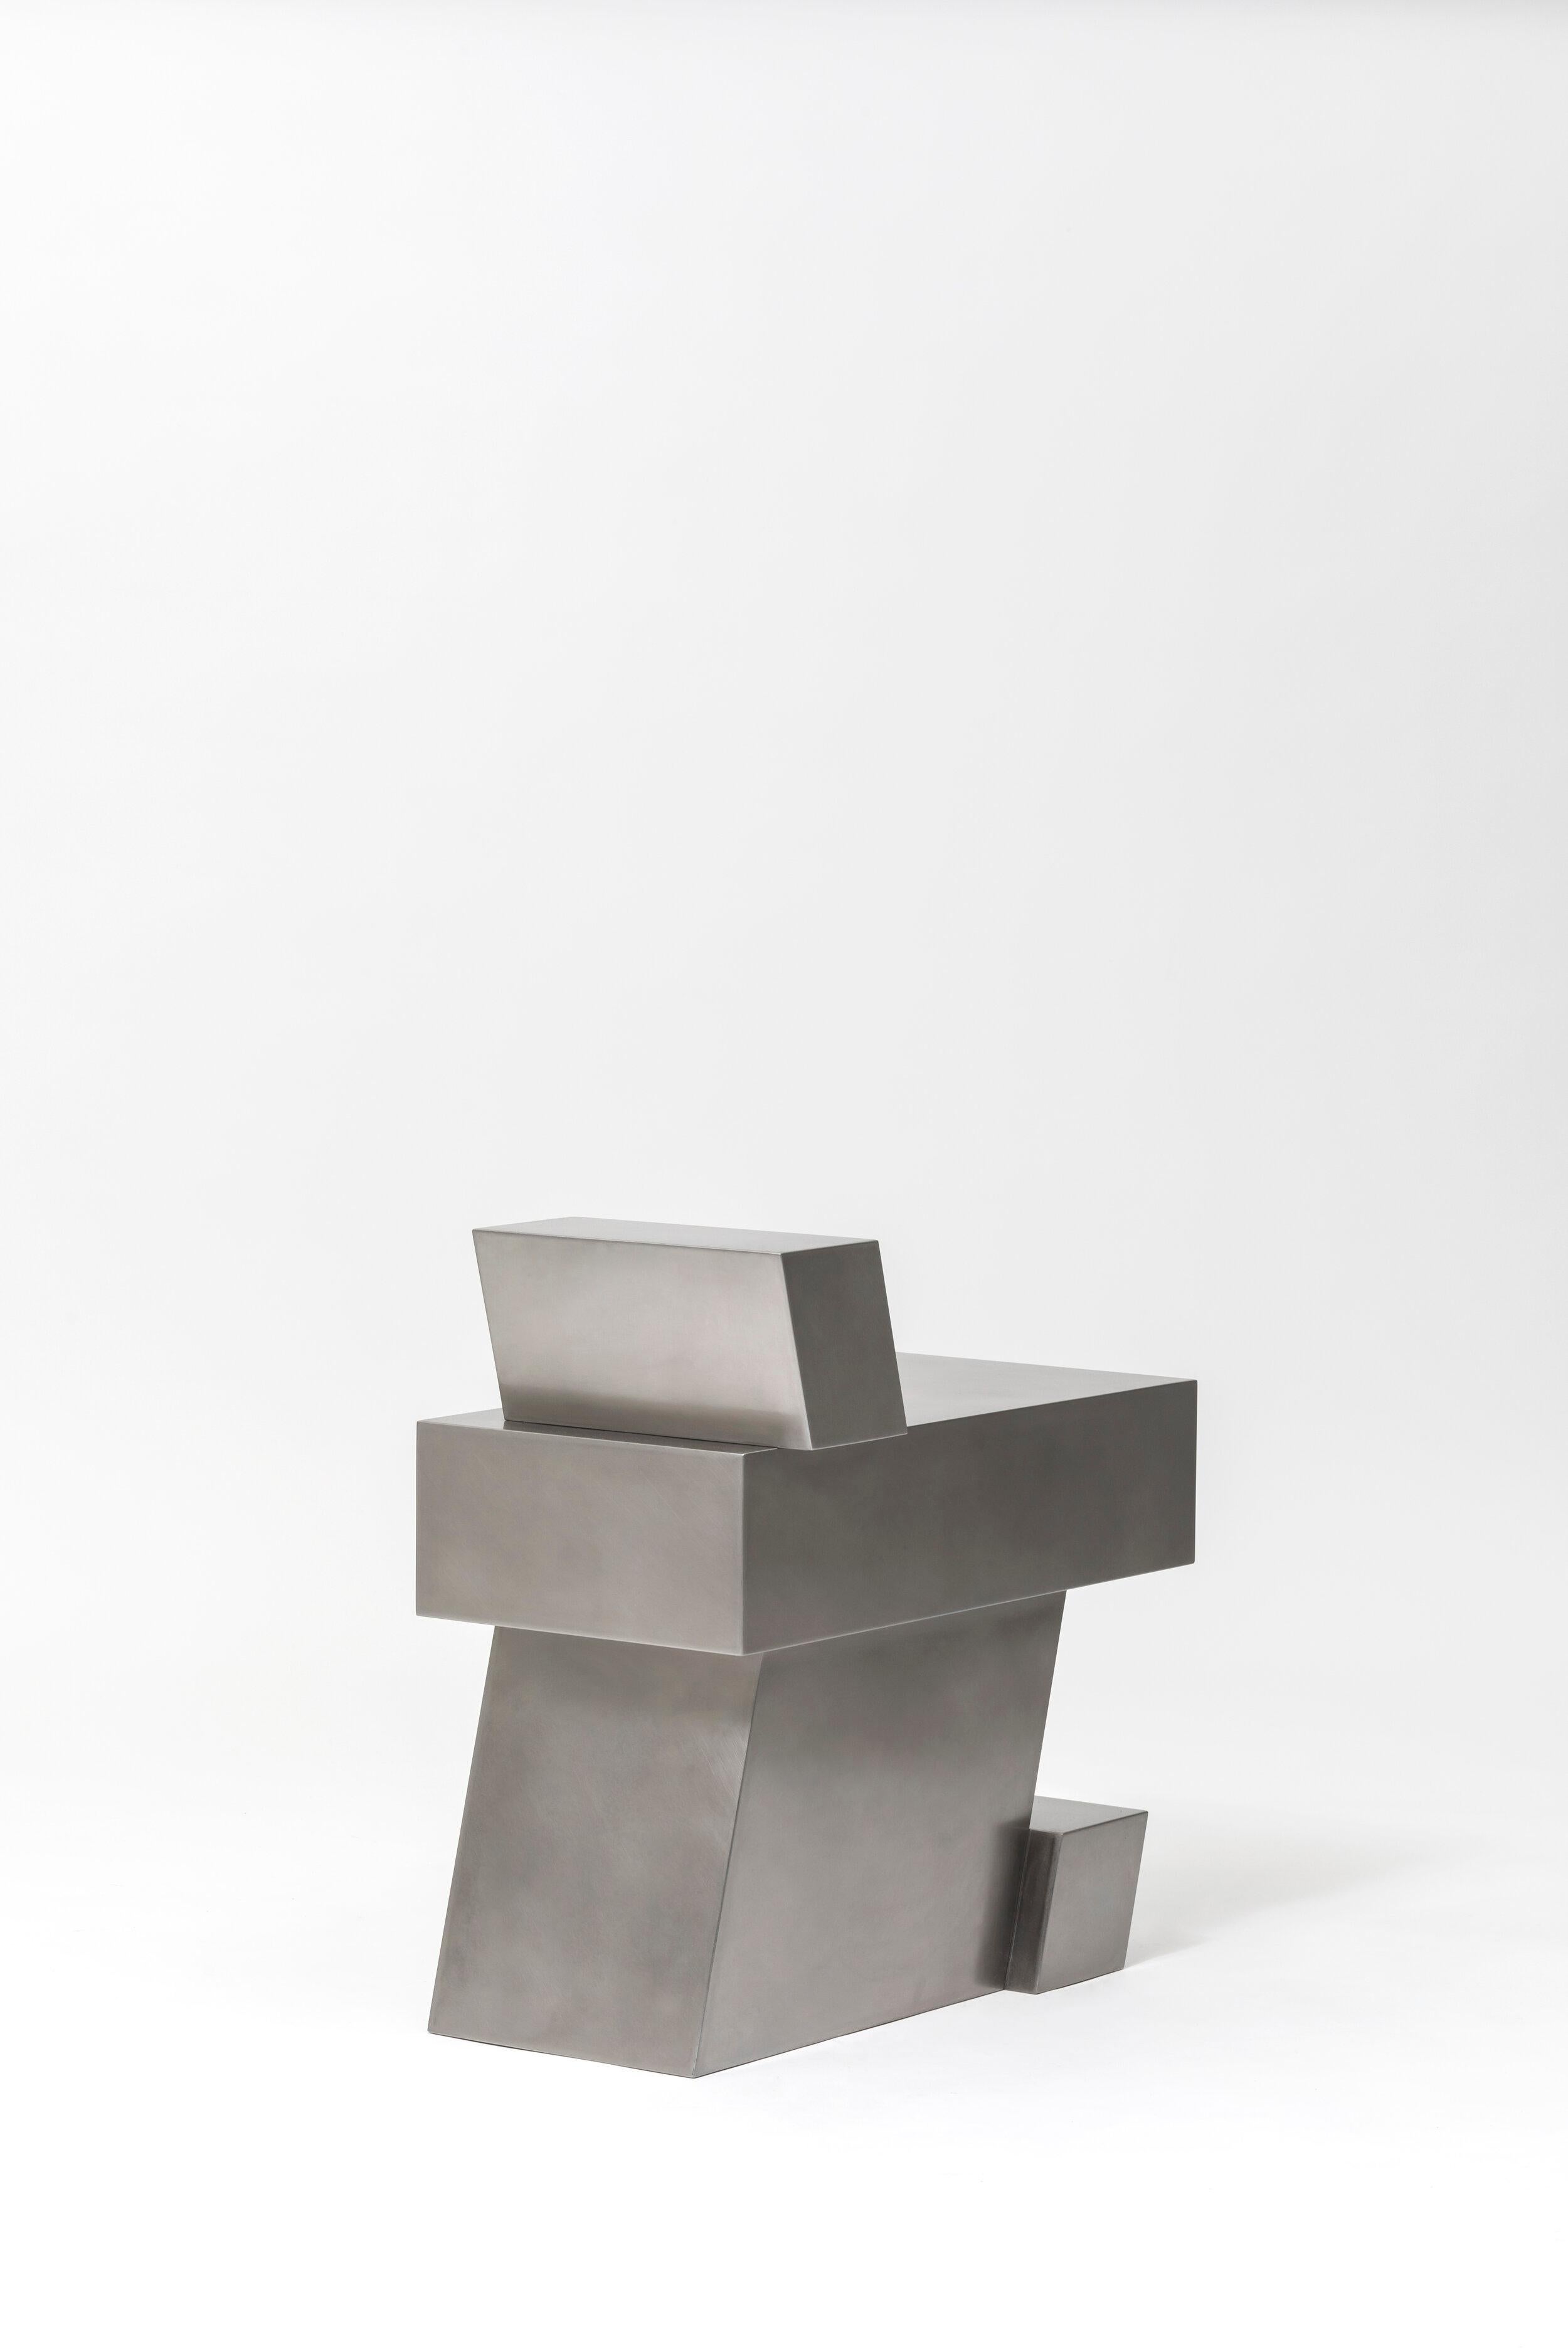 Post-Modern Layered Steel Seat XVI by Hyungshin Hwang For Sale